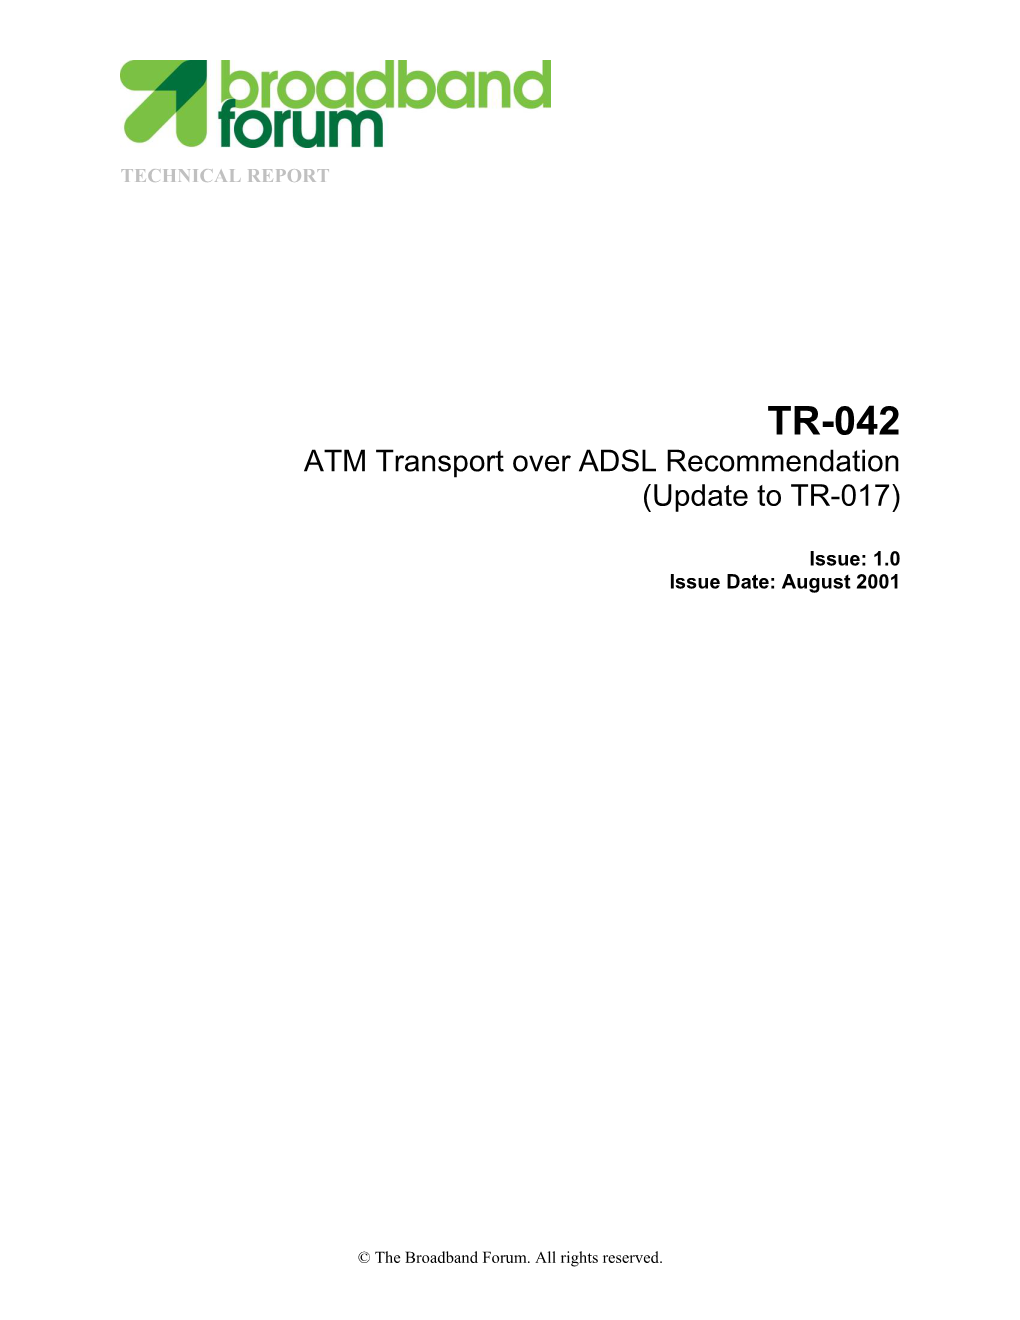 TR-042 ATM Transport Over ADSL Recommendation (Update to TR-017)